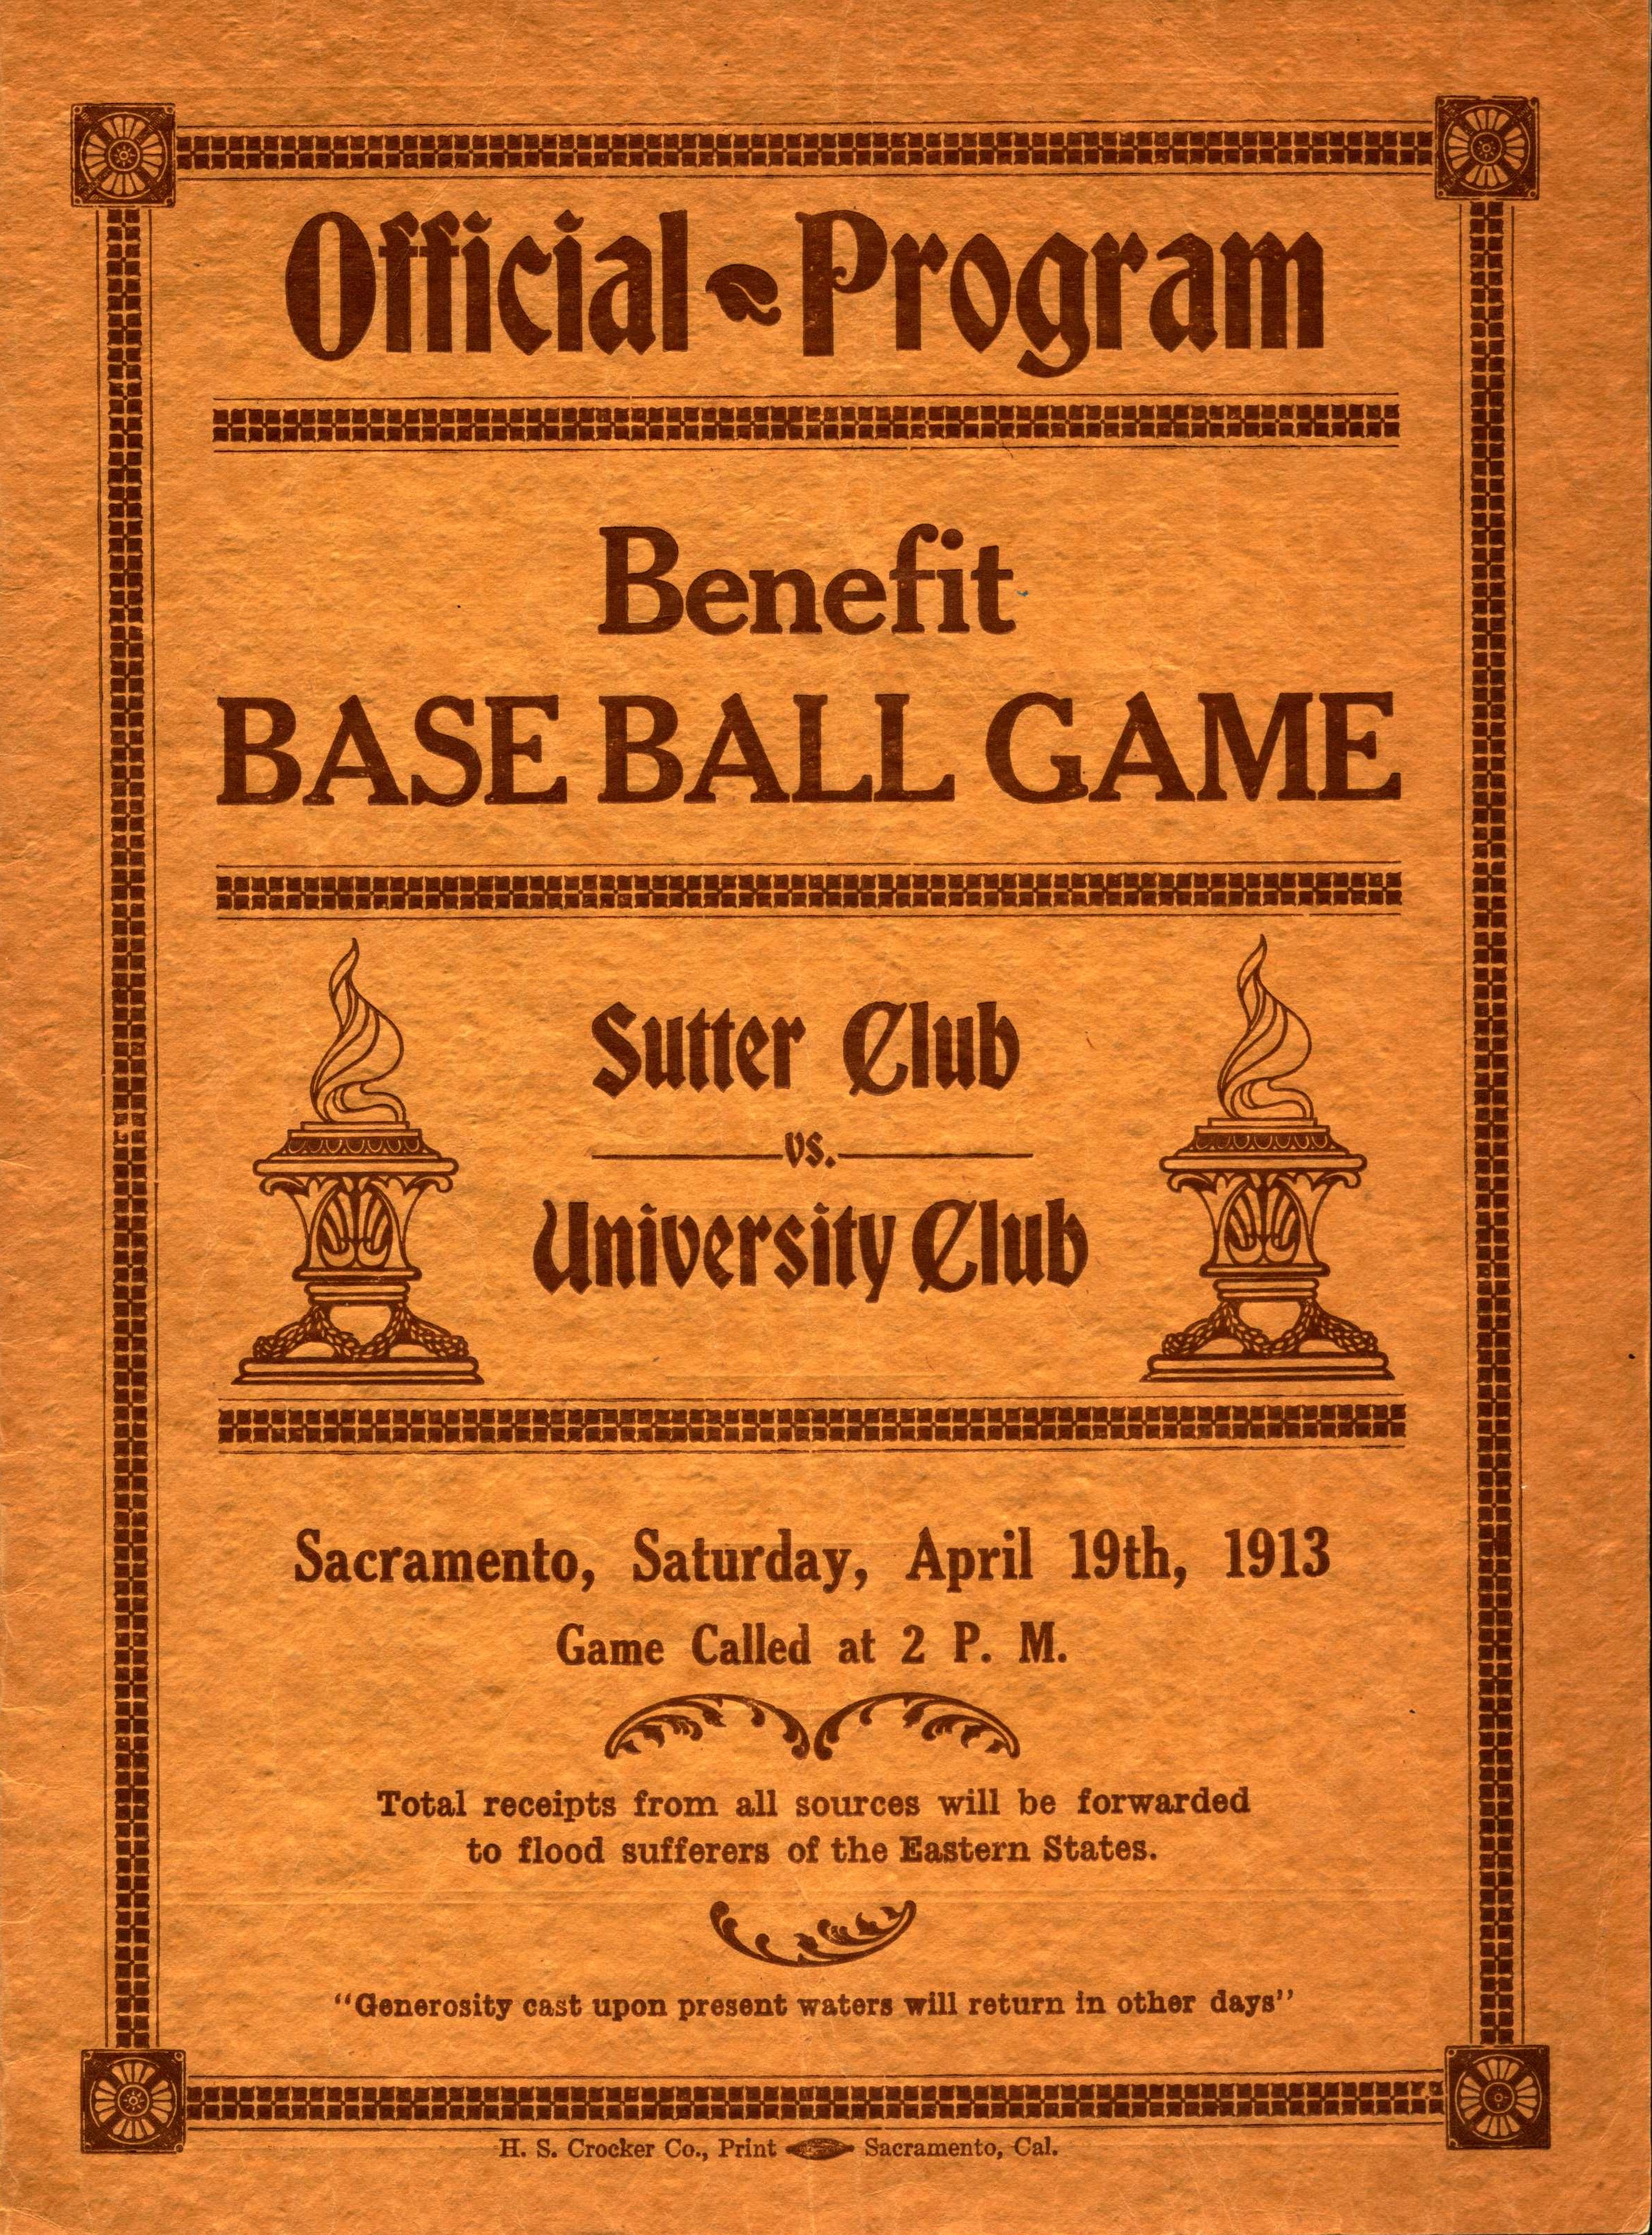 Cover shows information about the baseball game including who played, the date, location and purpose for the benefit